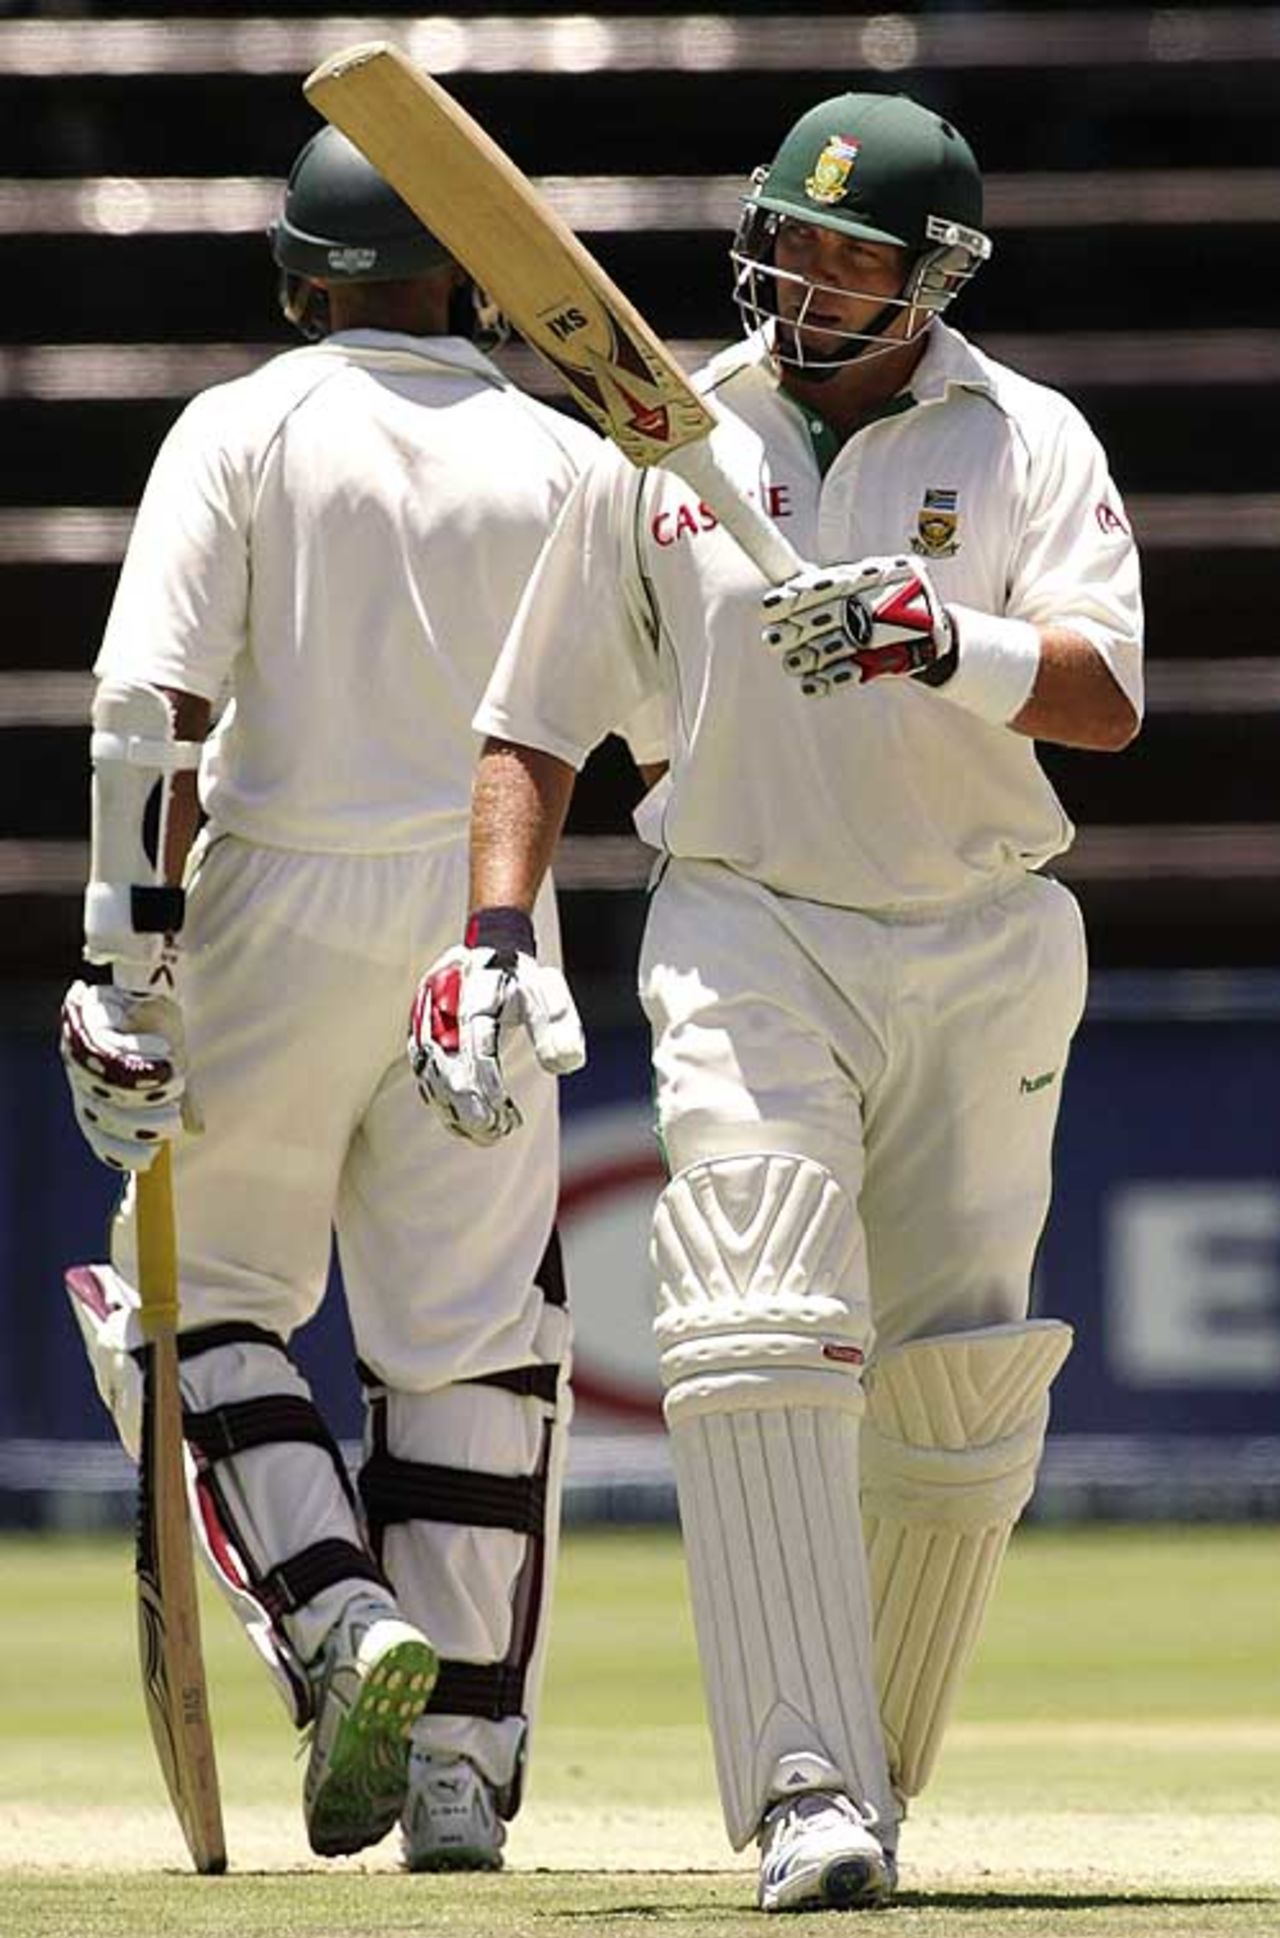 Jacques Kallis acknowledges the cheers after he went past 9000 Test runs, 1st Test, Johannesburg, 3rd day, November 10, 2007